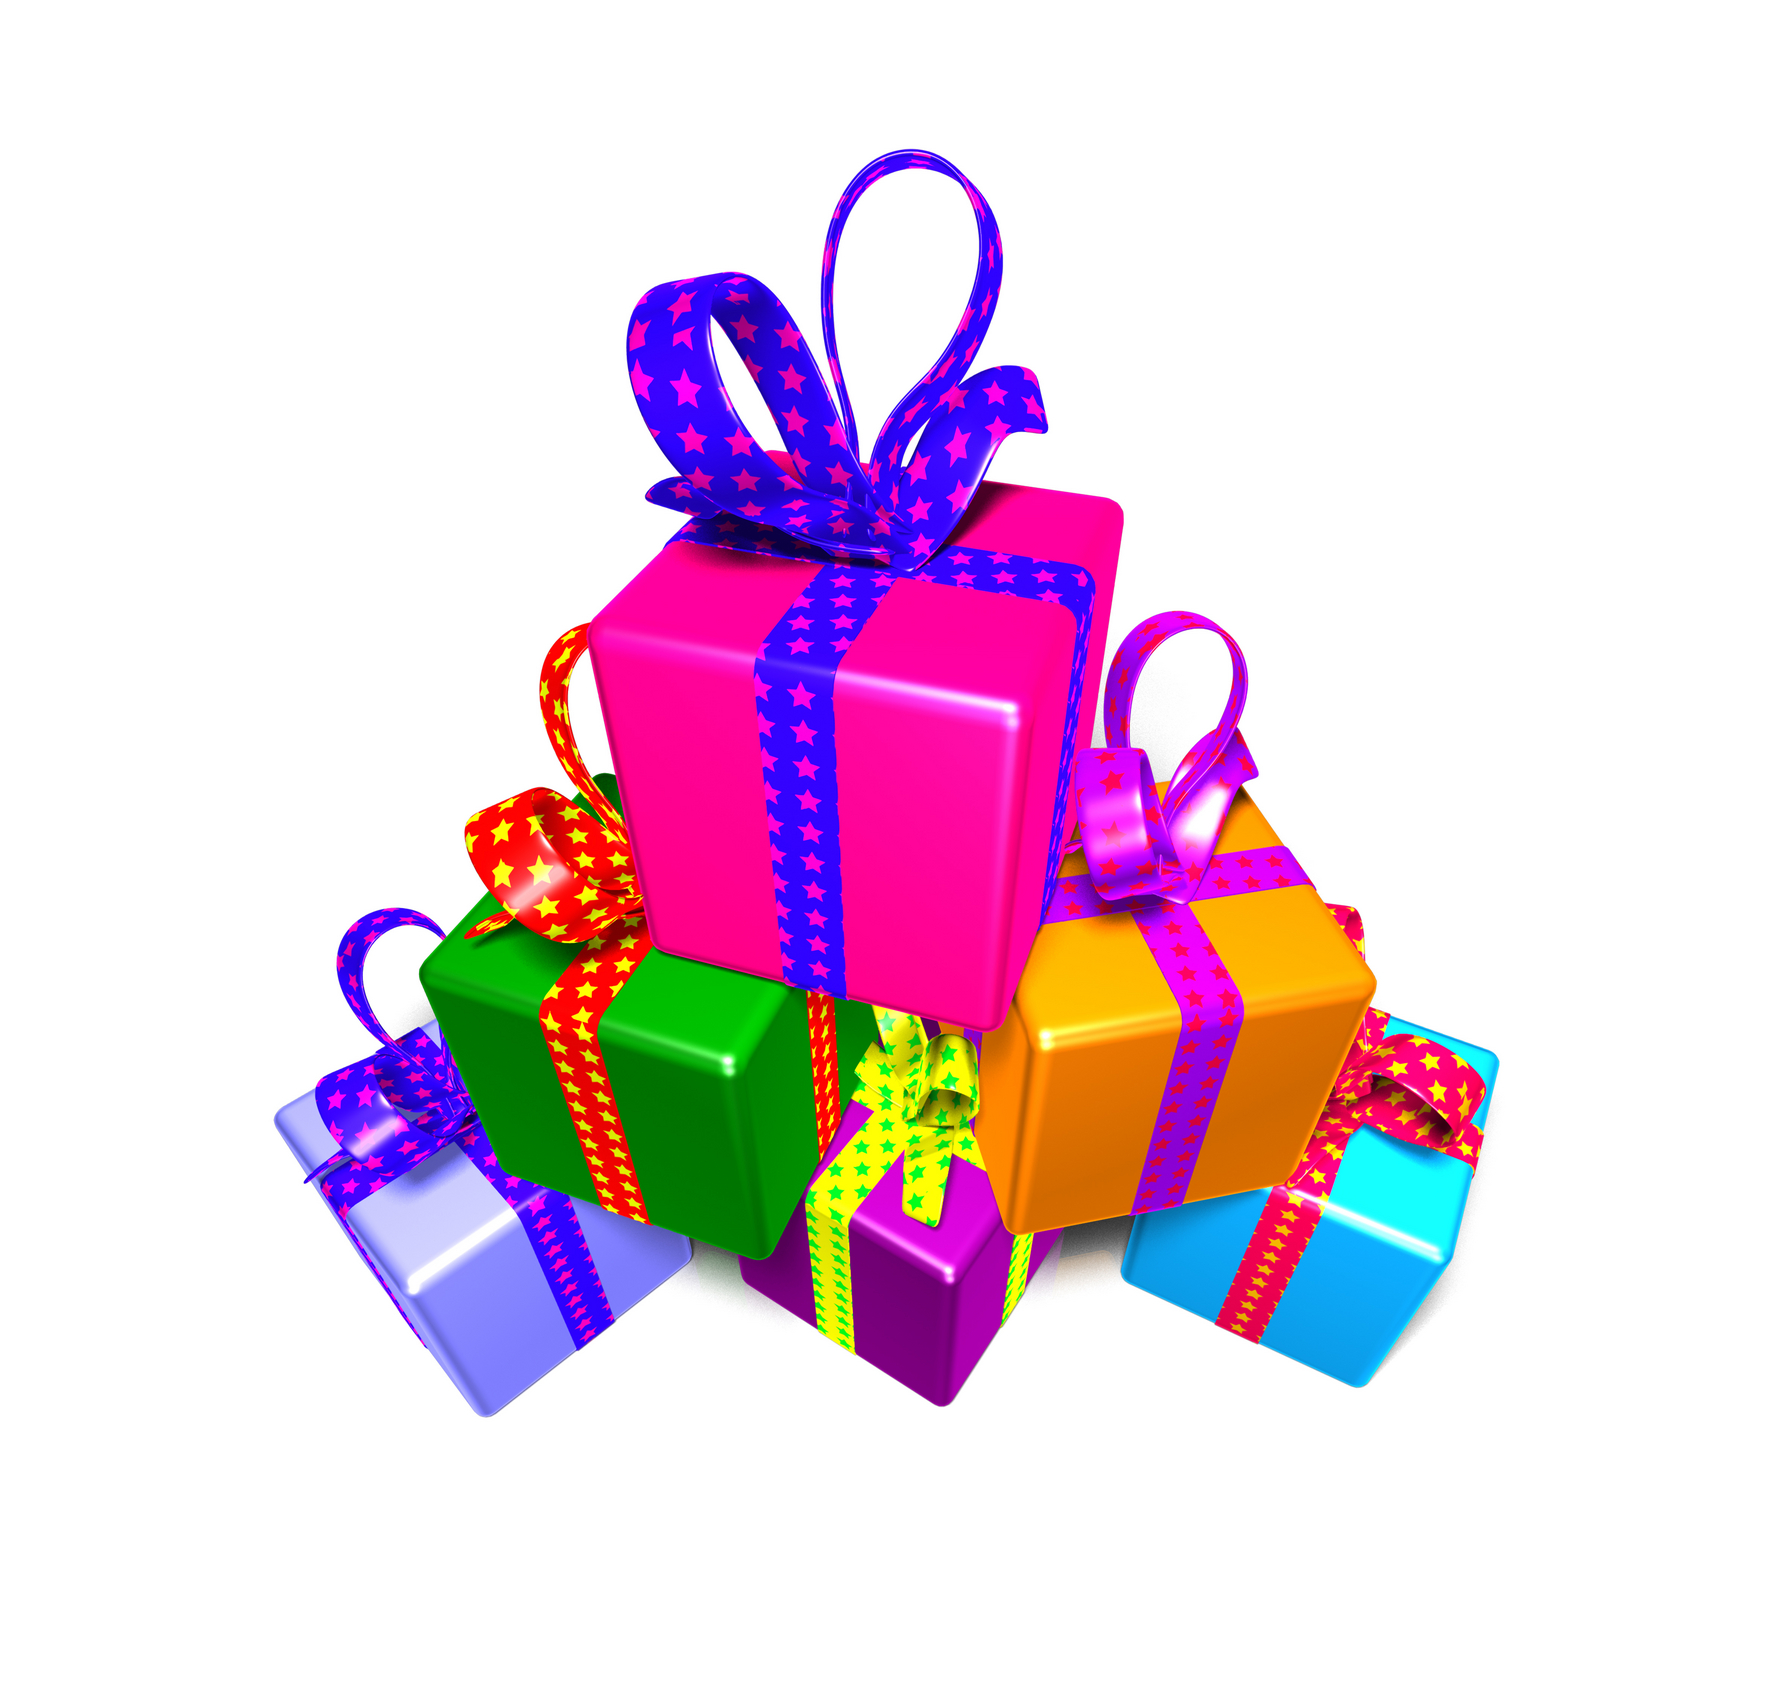 List 101+ Pictures Christmas Gift Images Free Completed